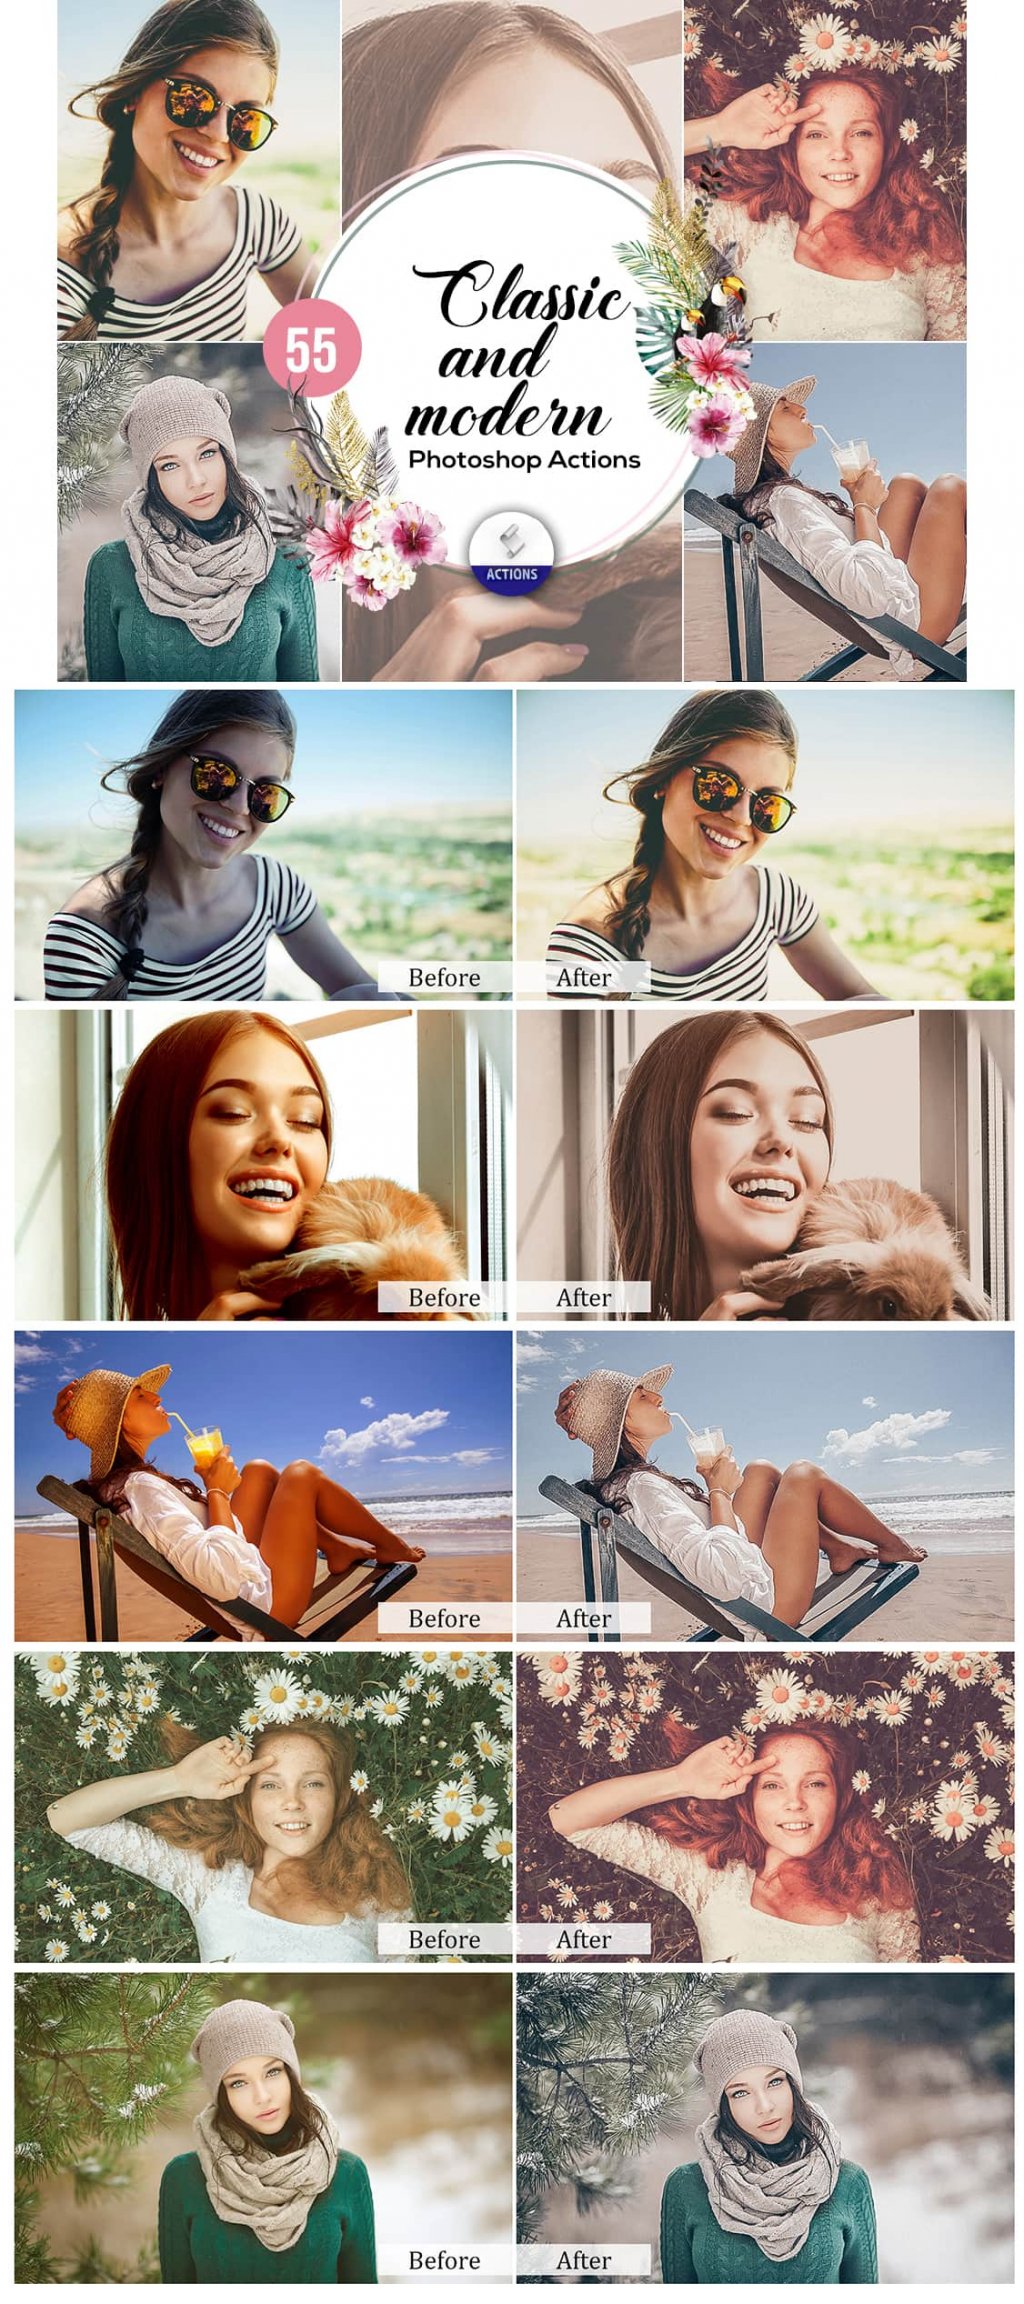 modern photoshop actions